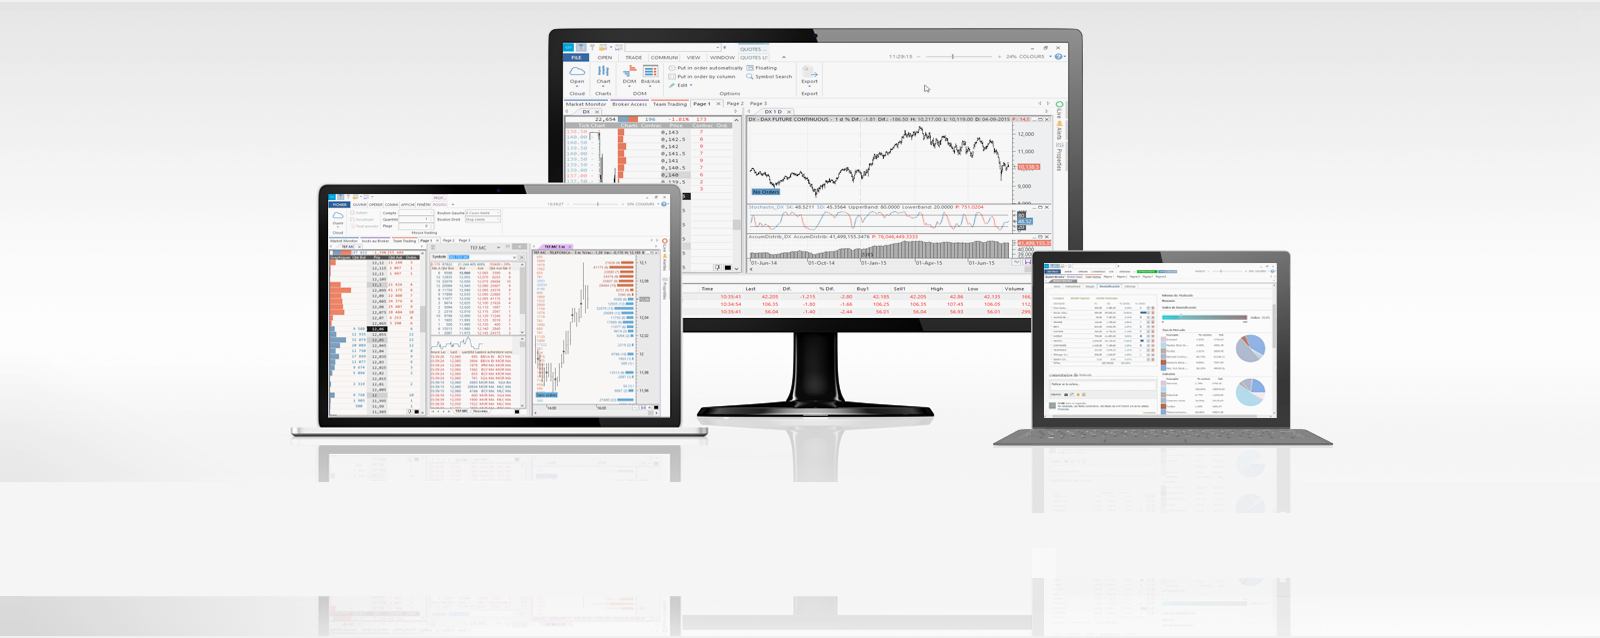 Real time trading platform for profesional traders